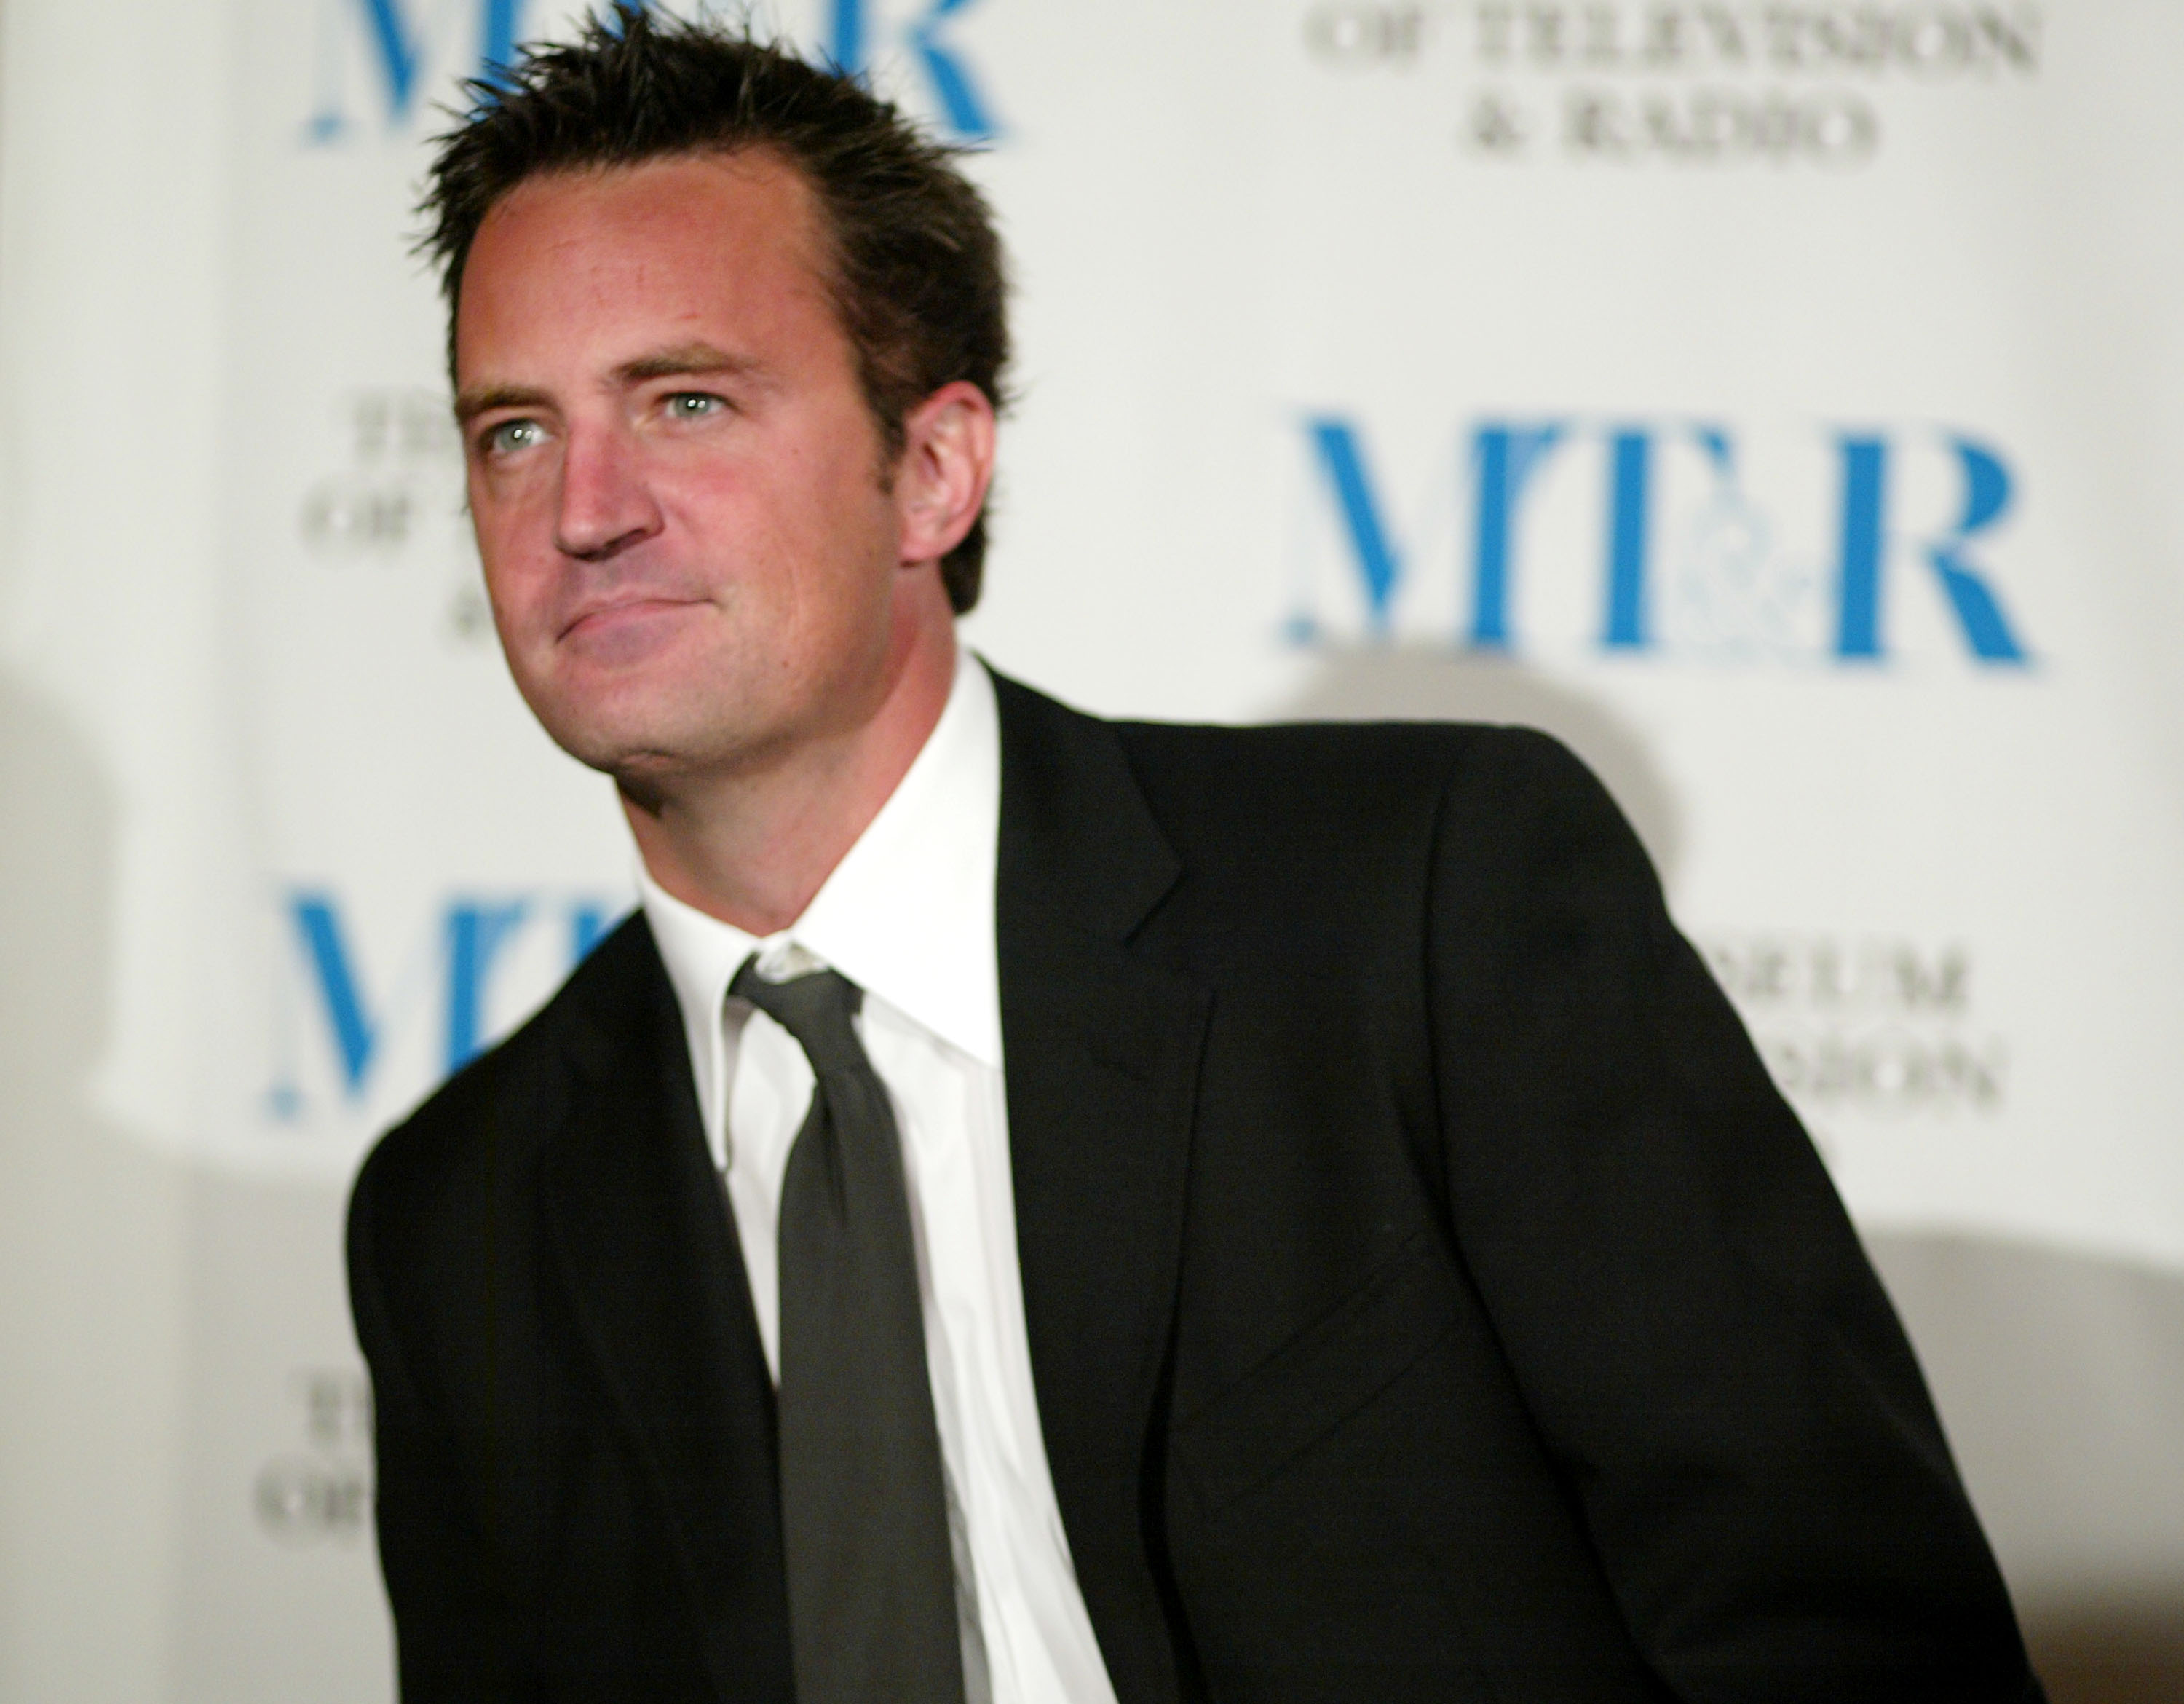 ‘Friends’ Star, Matthew Perry, Dated This ‘Mean Girls’ Star for Years